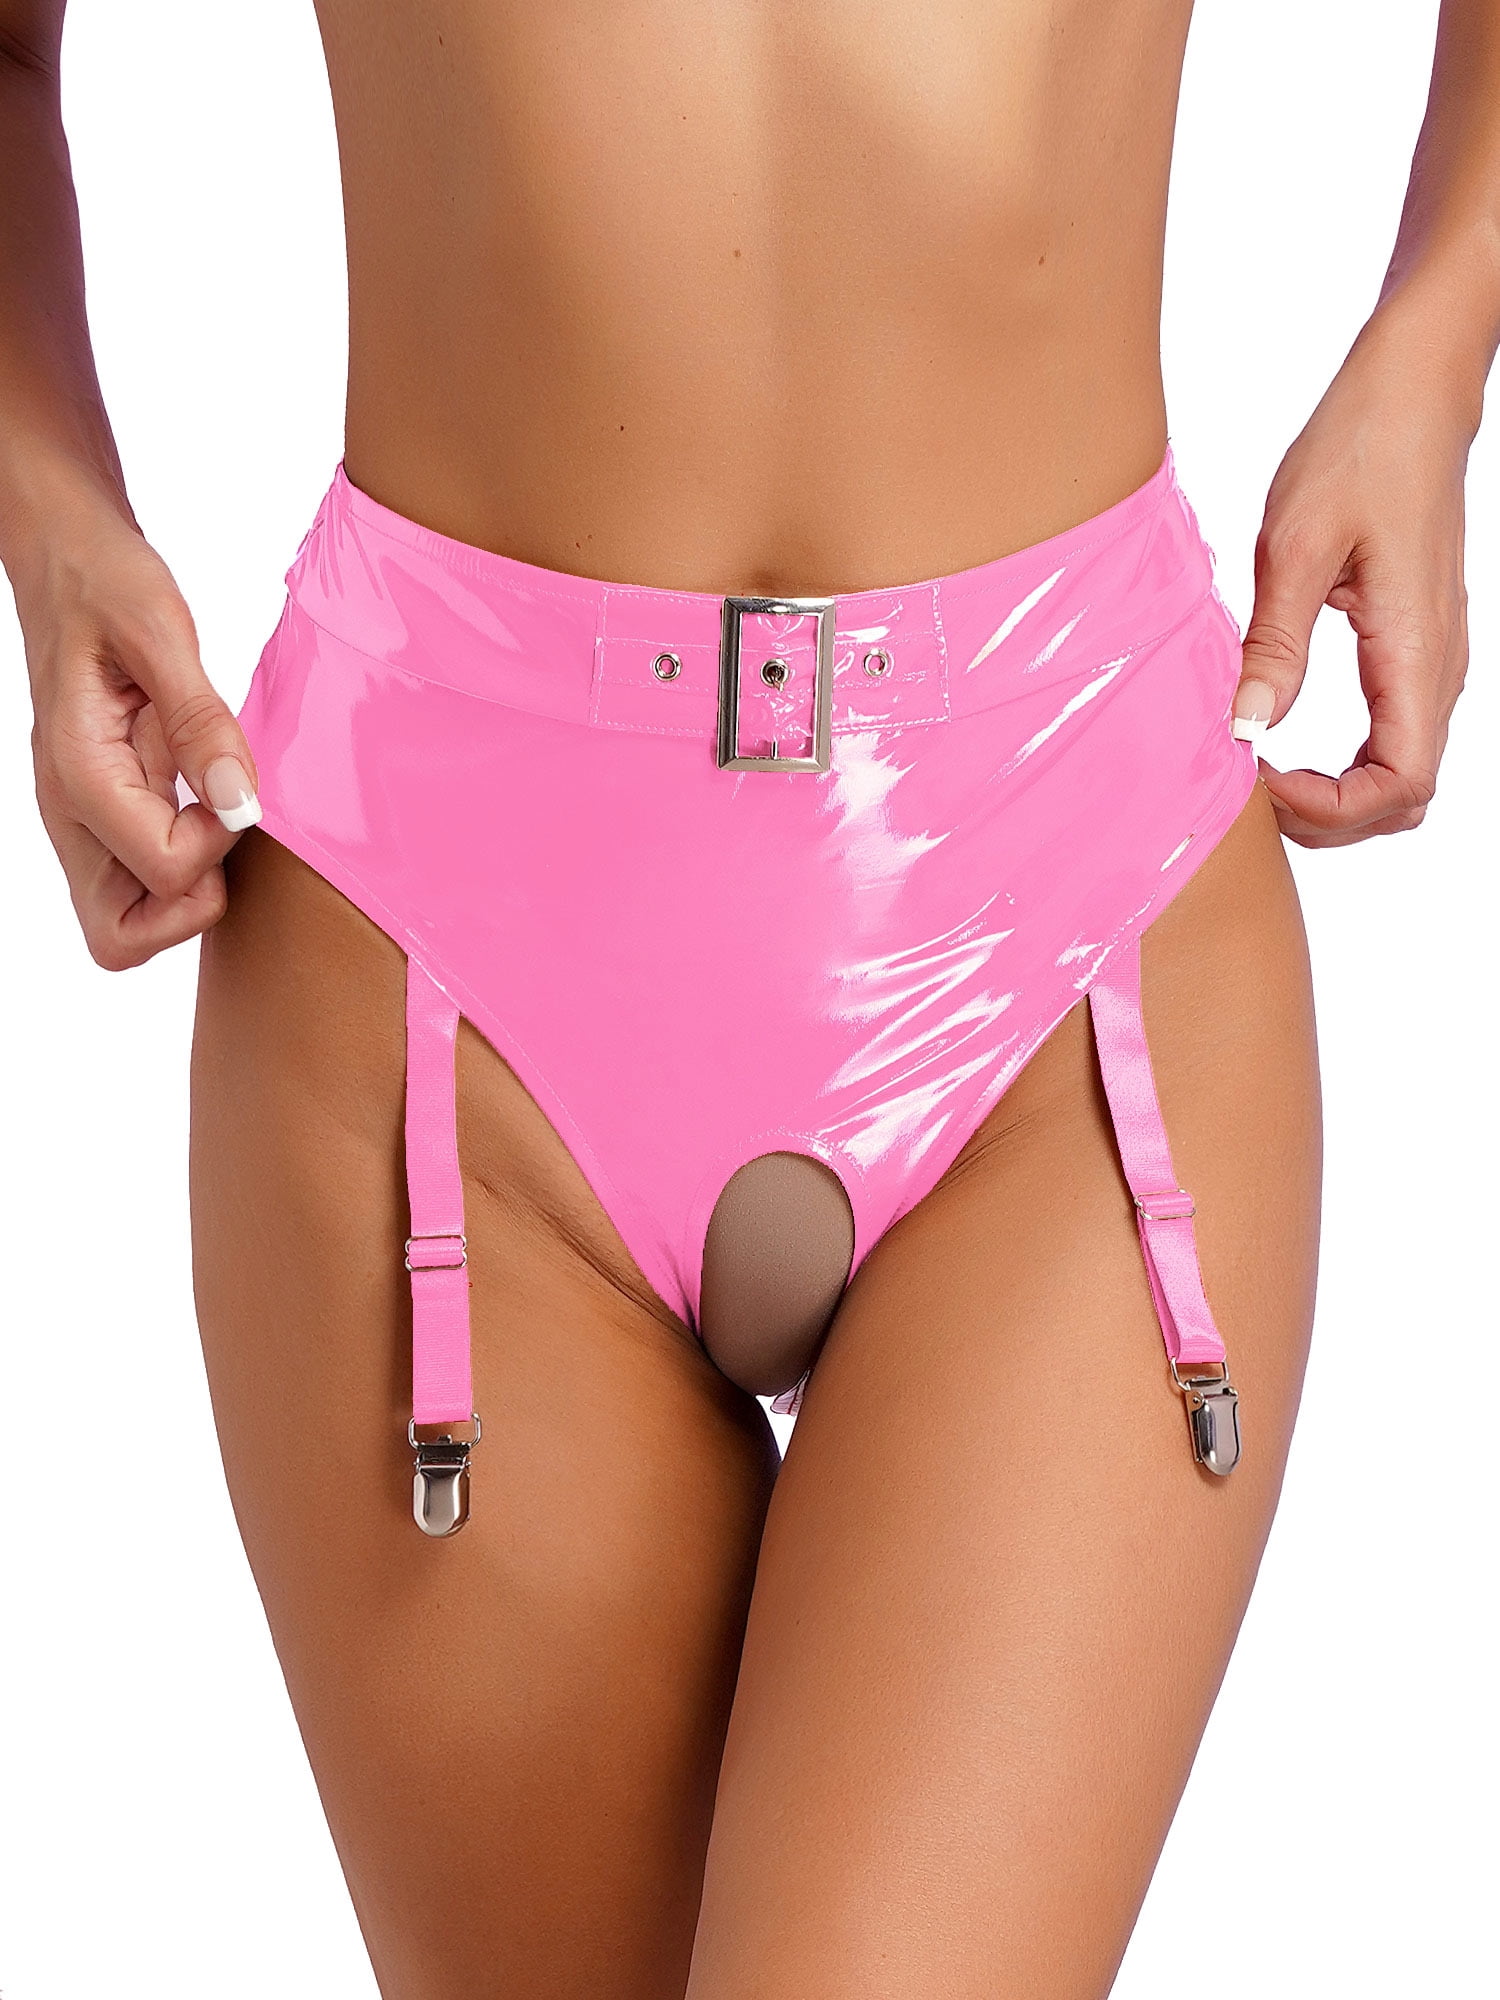 iEFiEL Womens Latex Underwear with Garter Clips Exotic Lingerie